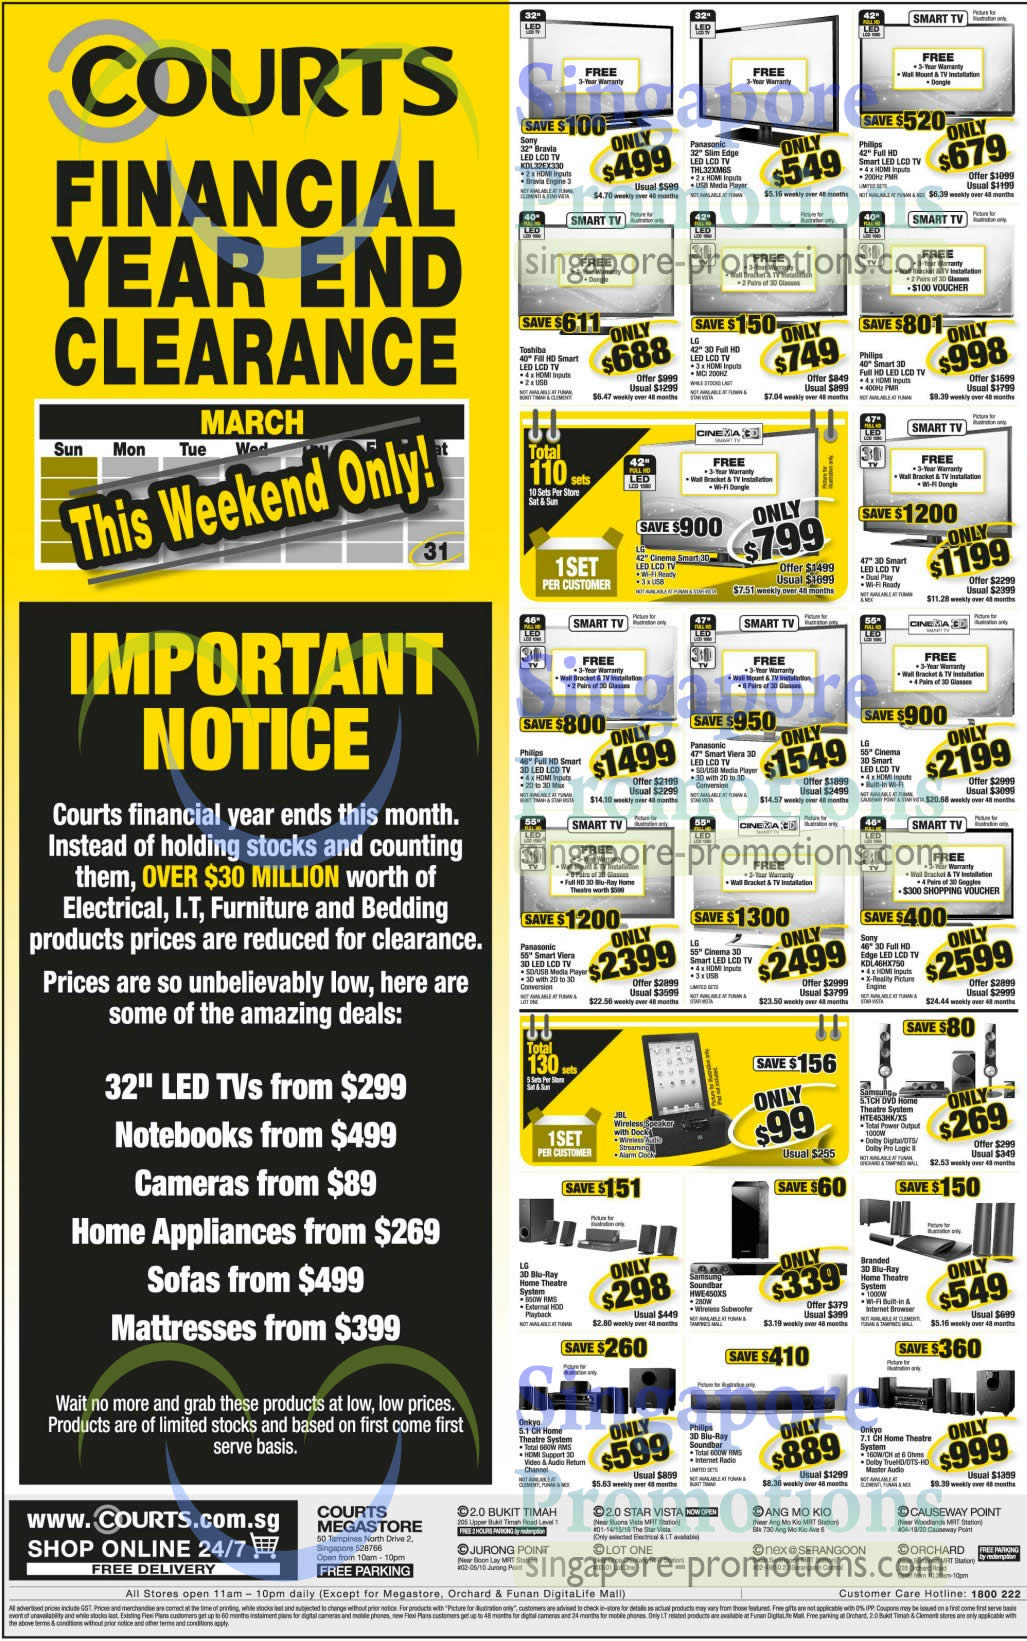 Featured image for Courts Financial Year End Clearance 16 - 17 Mar 2013